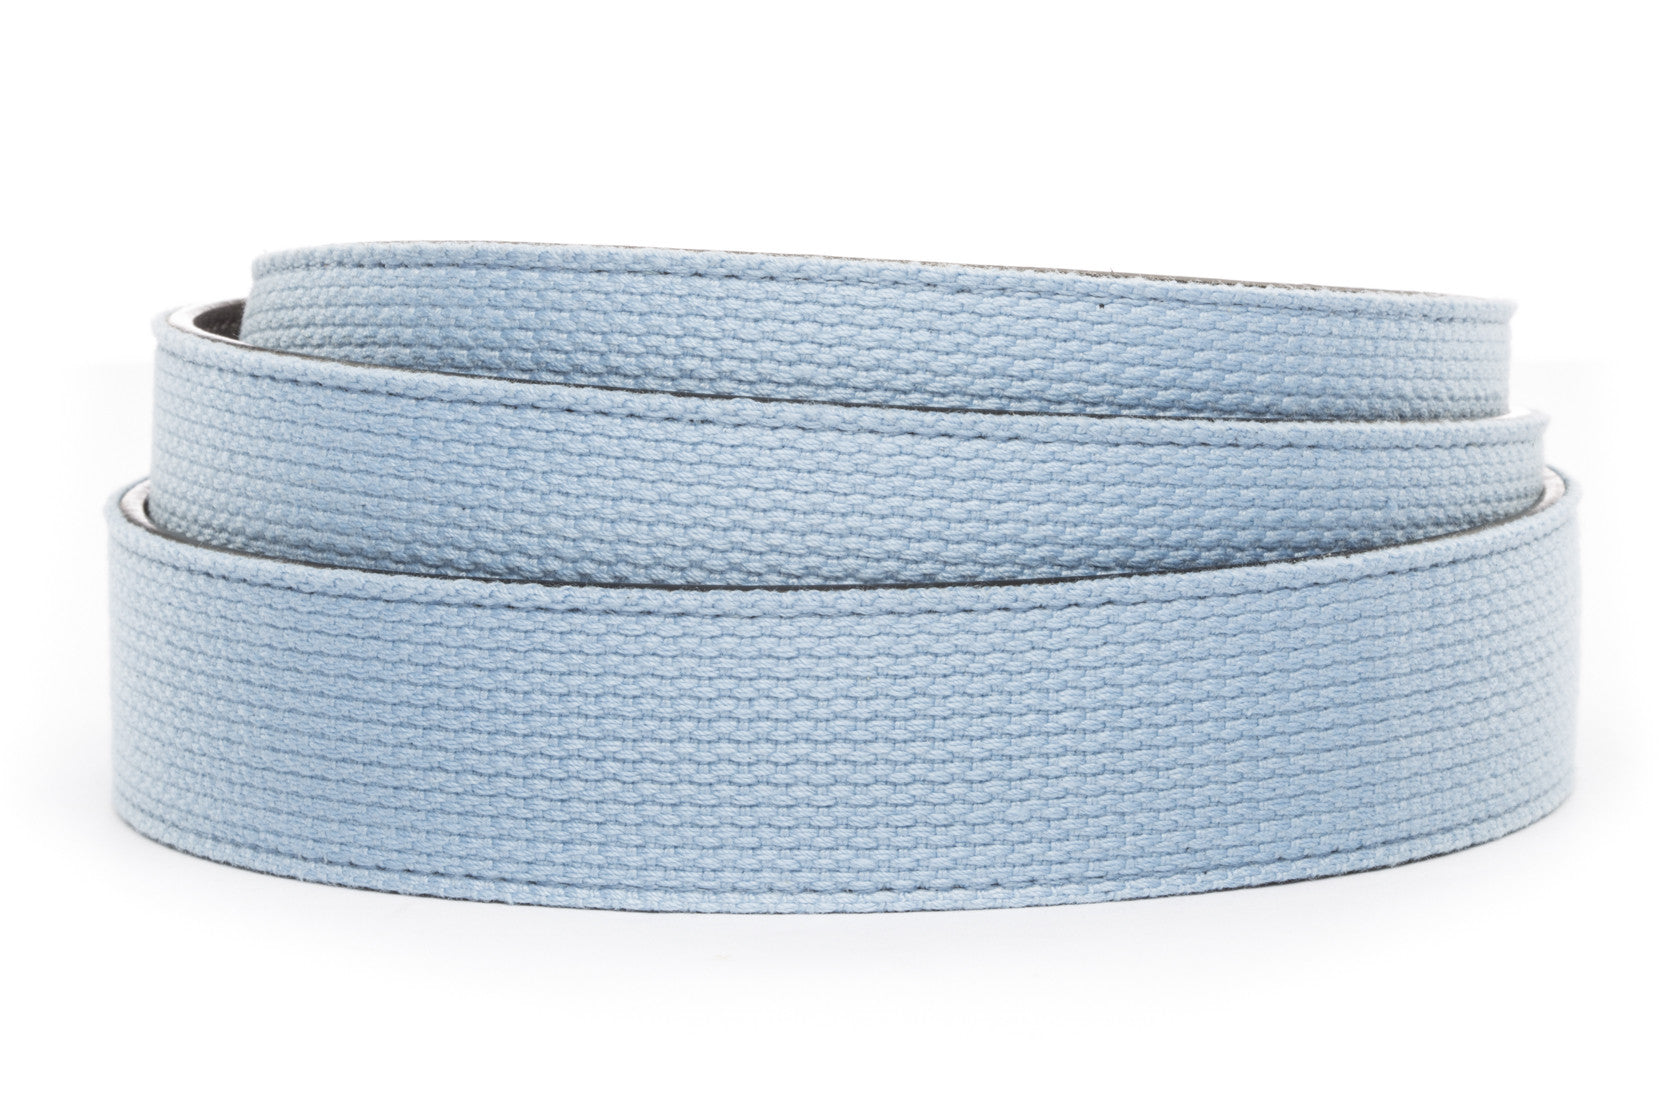 Men's canvas belt strap in light blue with a 1.25-inch width, casual look